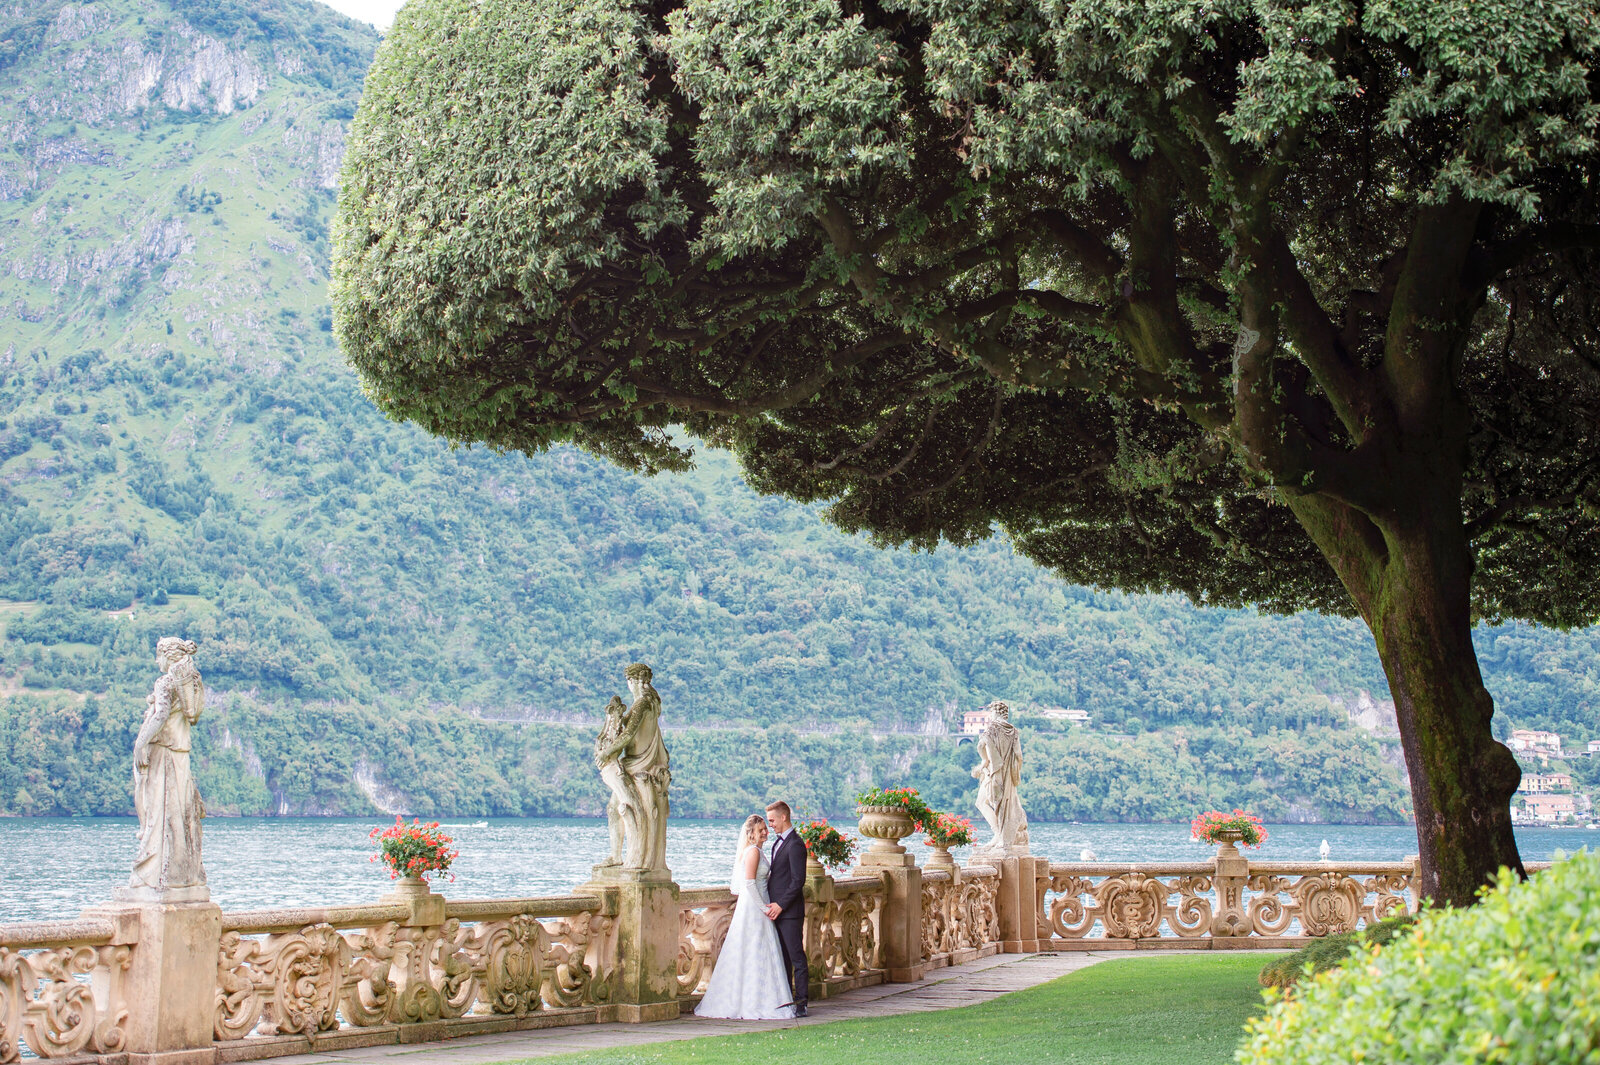 Bride and groom leaning against stone railing by lake